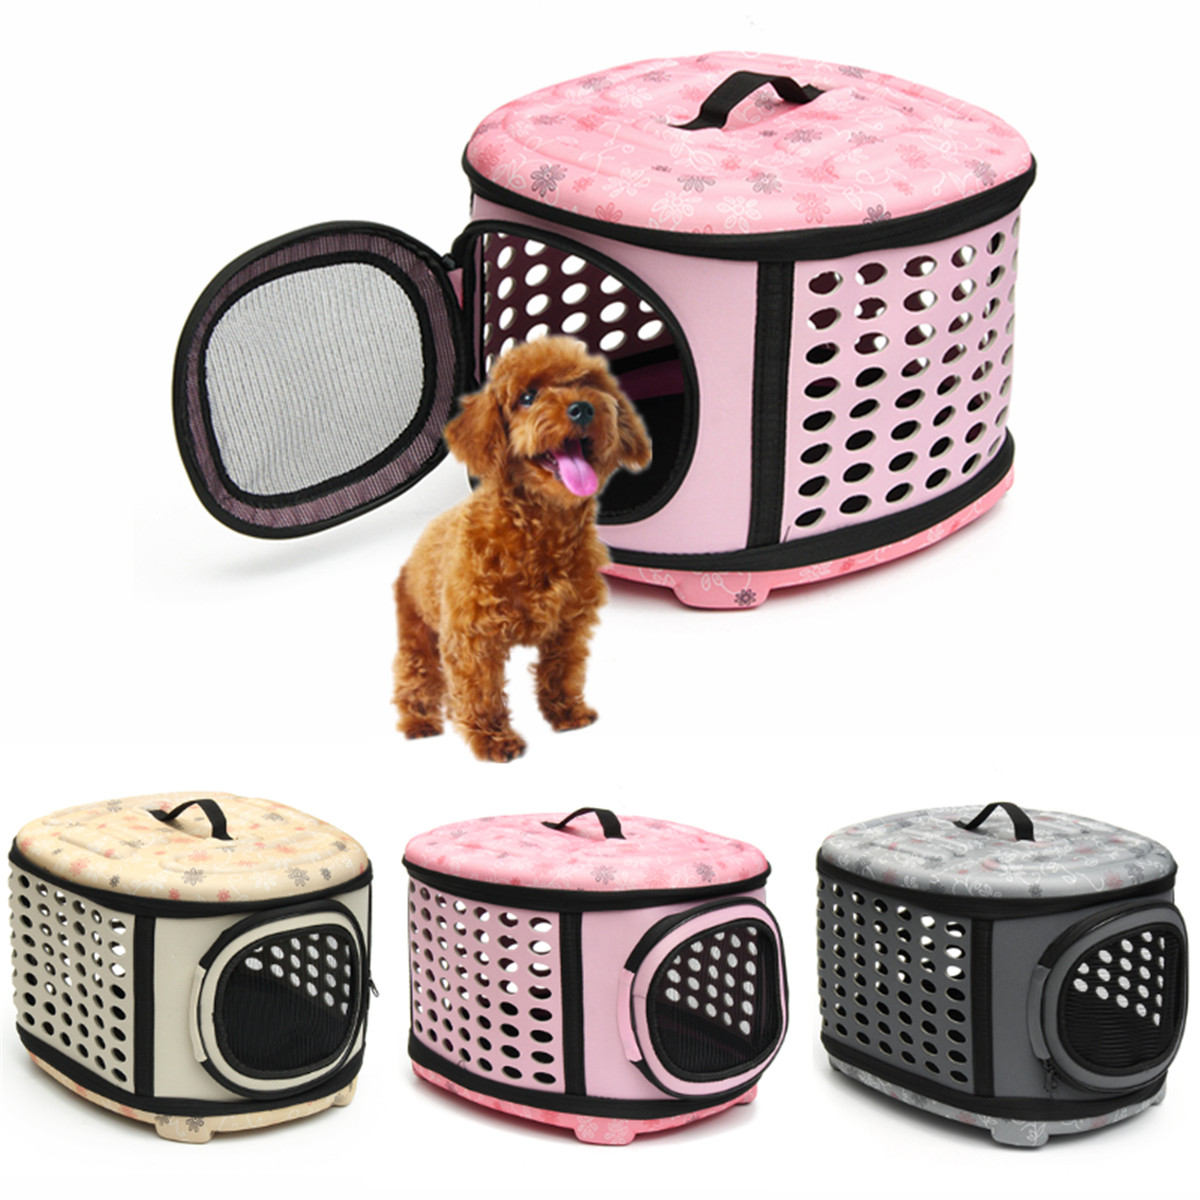 Small-Pet-Dog-Cat-Puppy-Carrier-Portable-Cage-Crate-Transporter-Bag-1166529-4